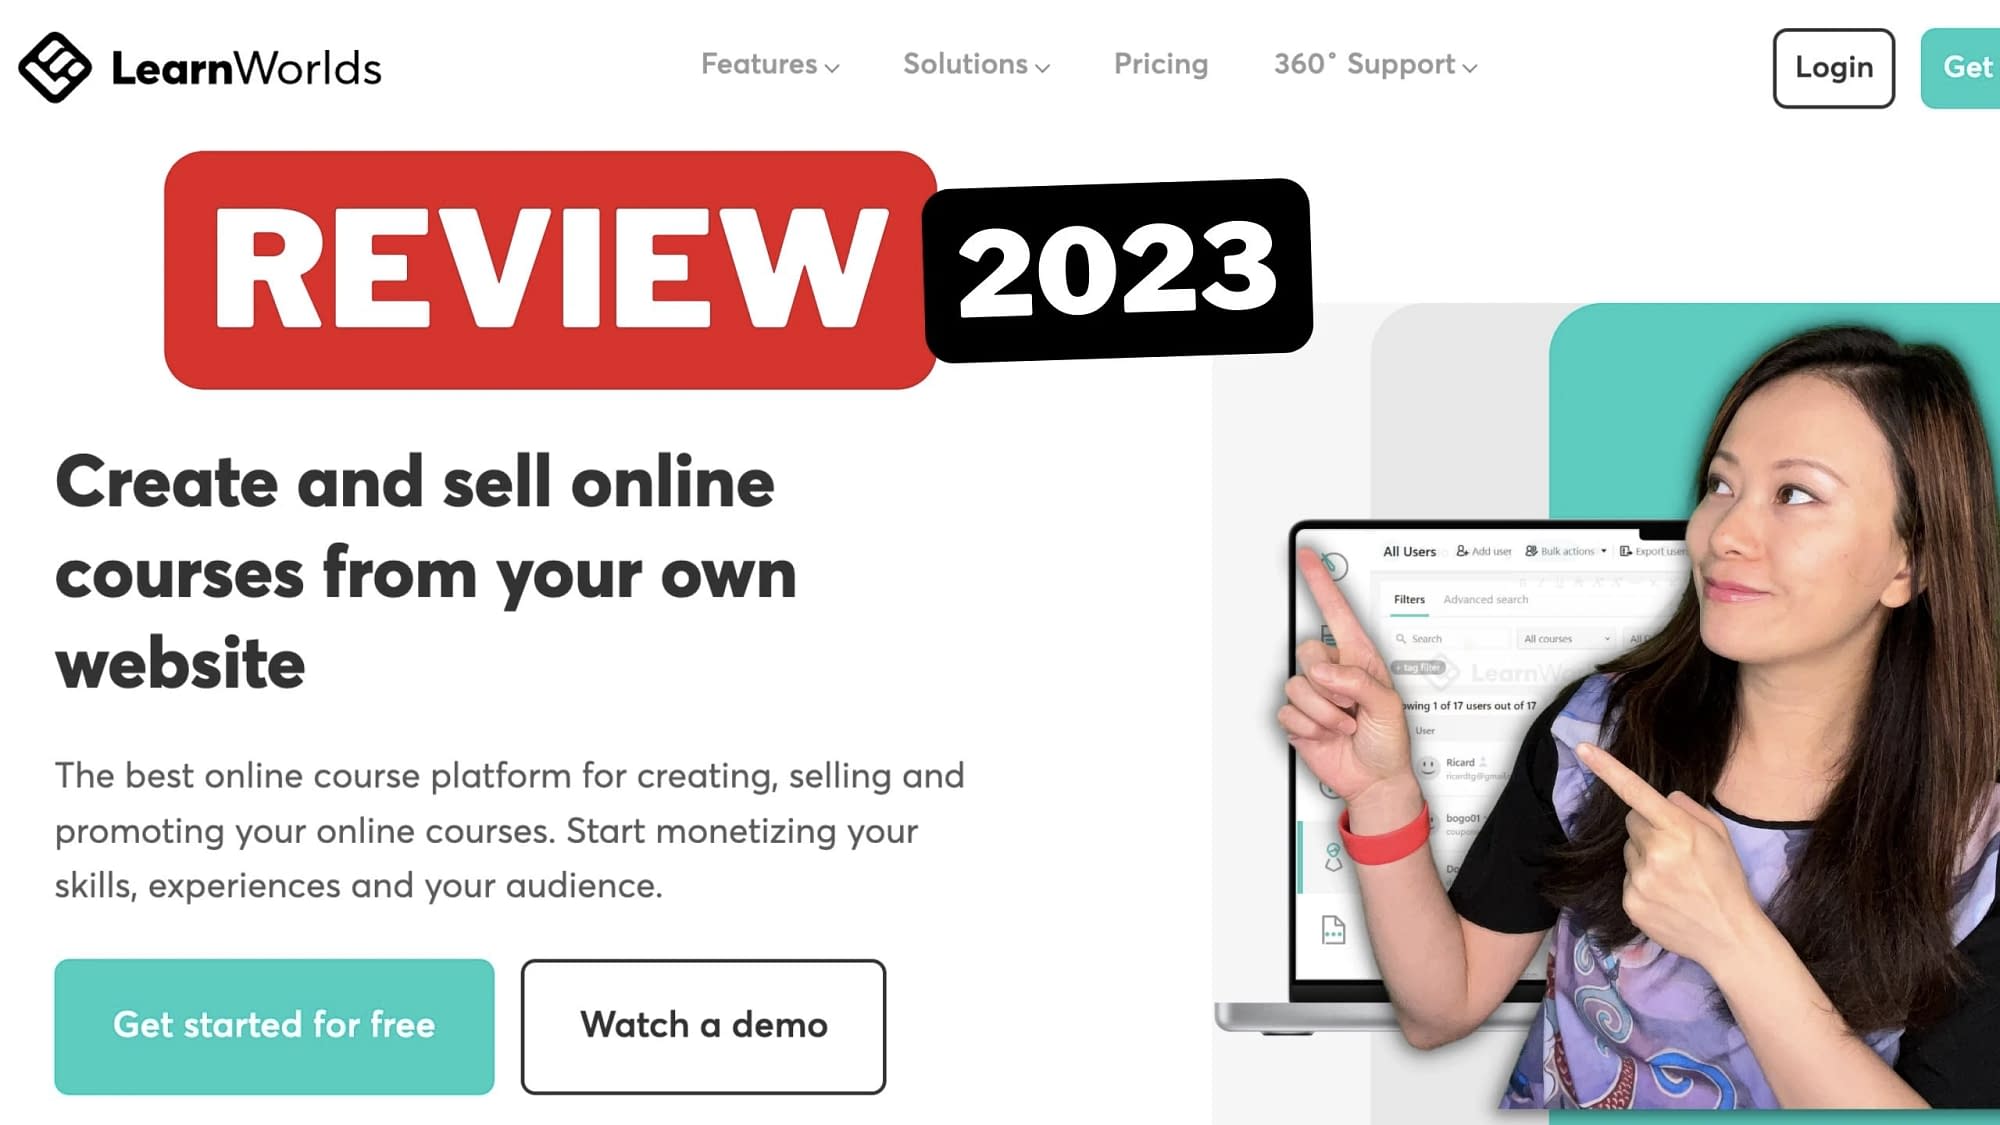 LearnWorlds Review (2023)